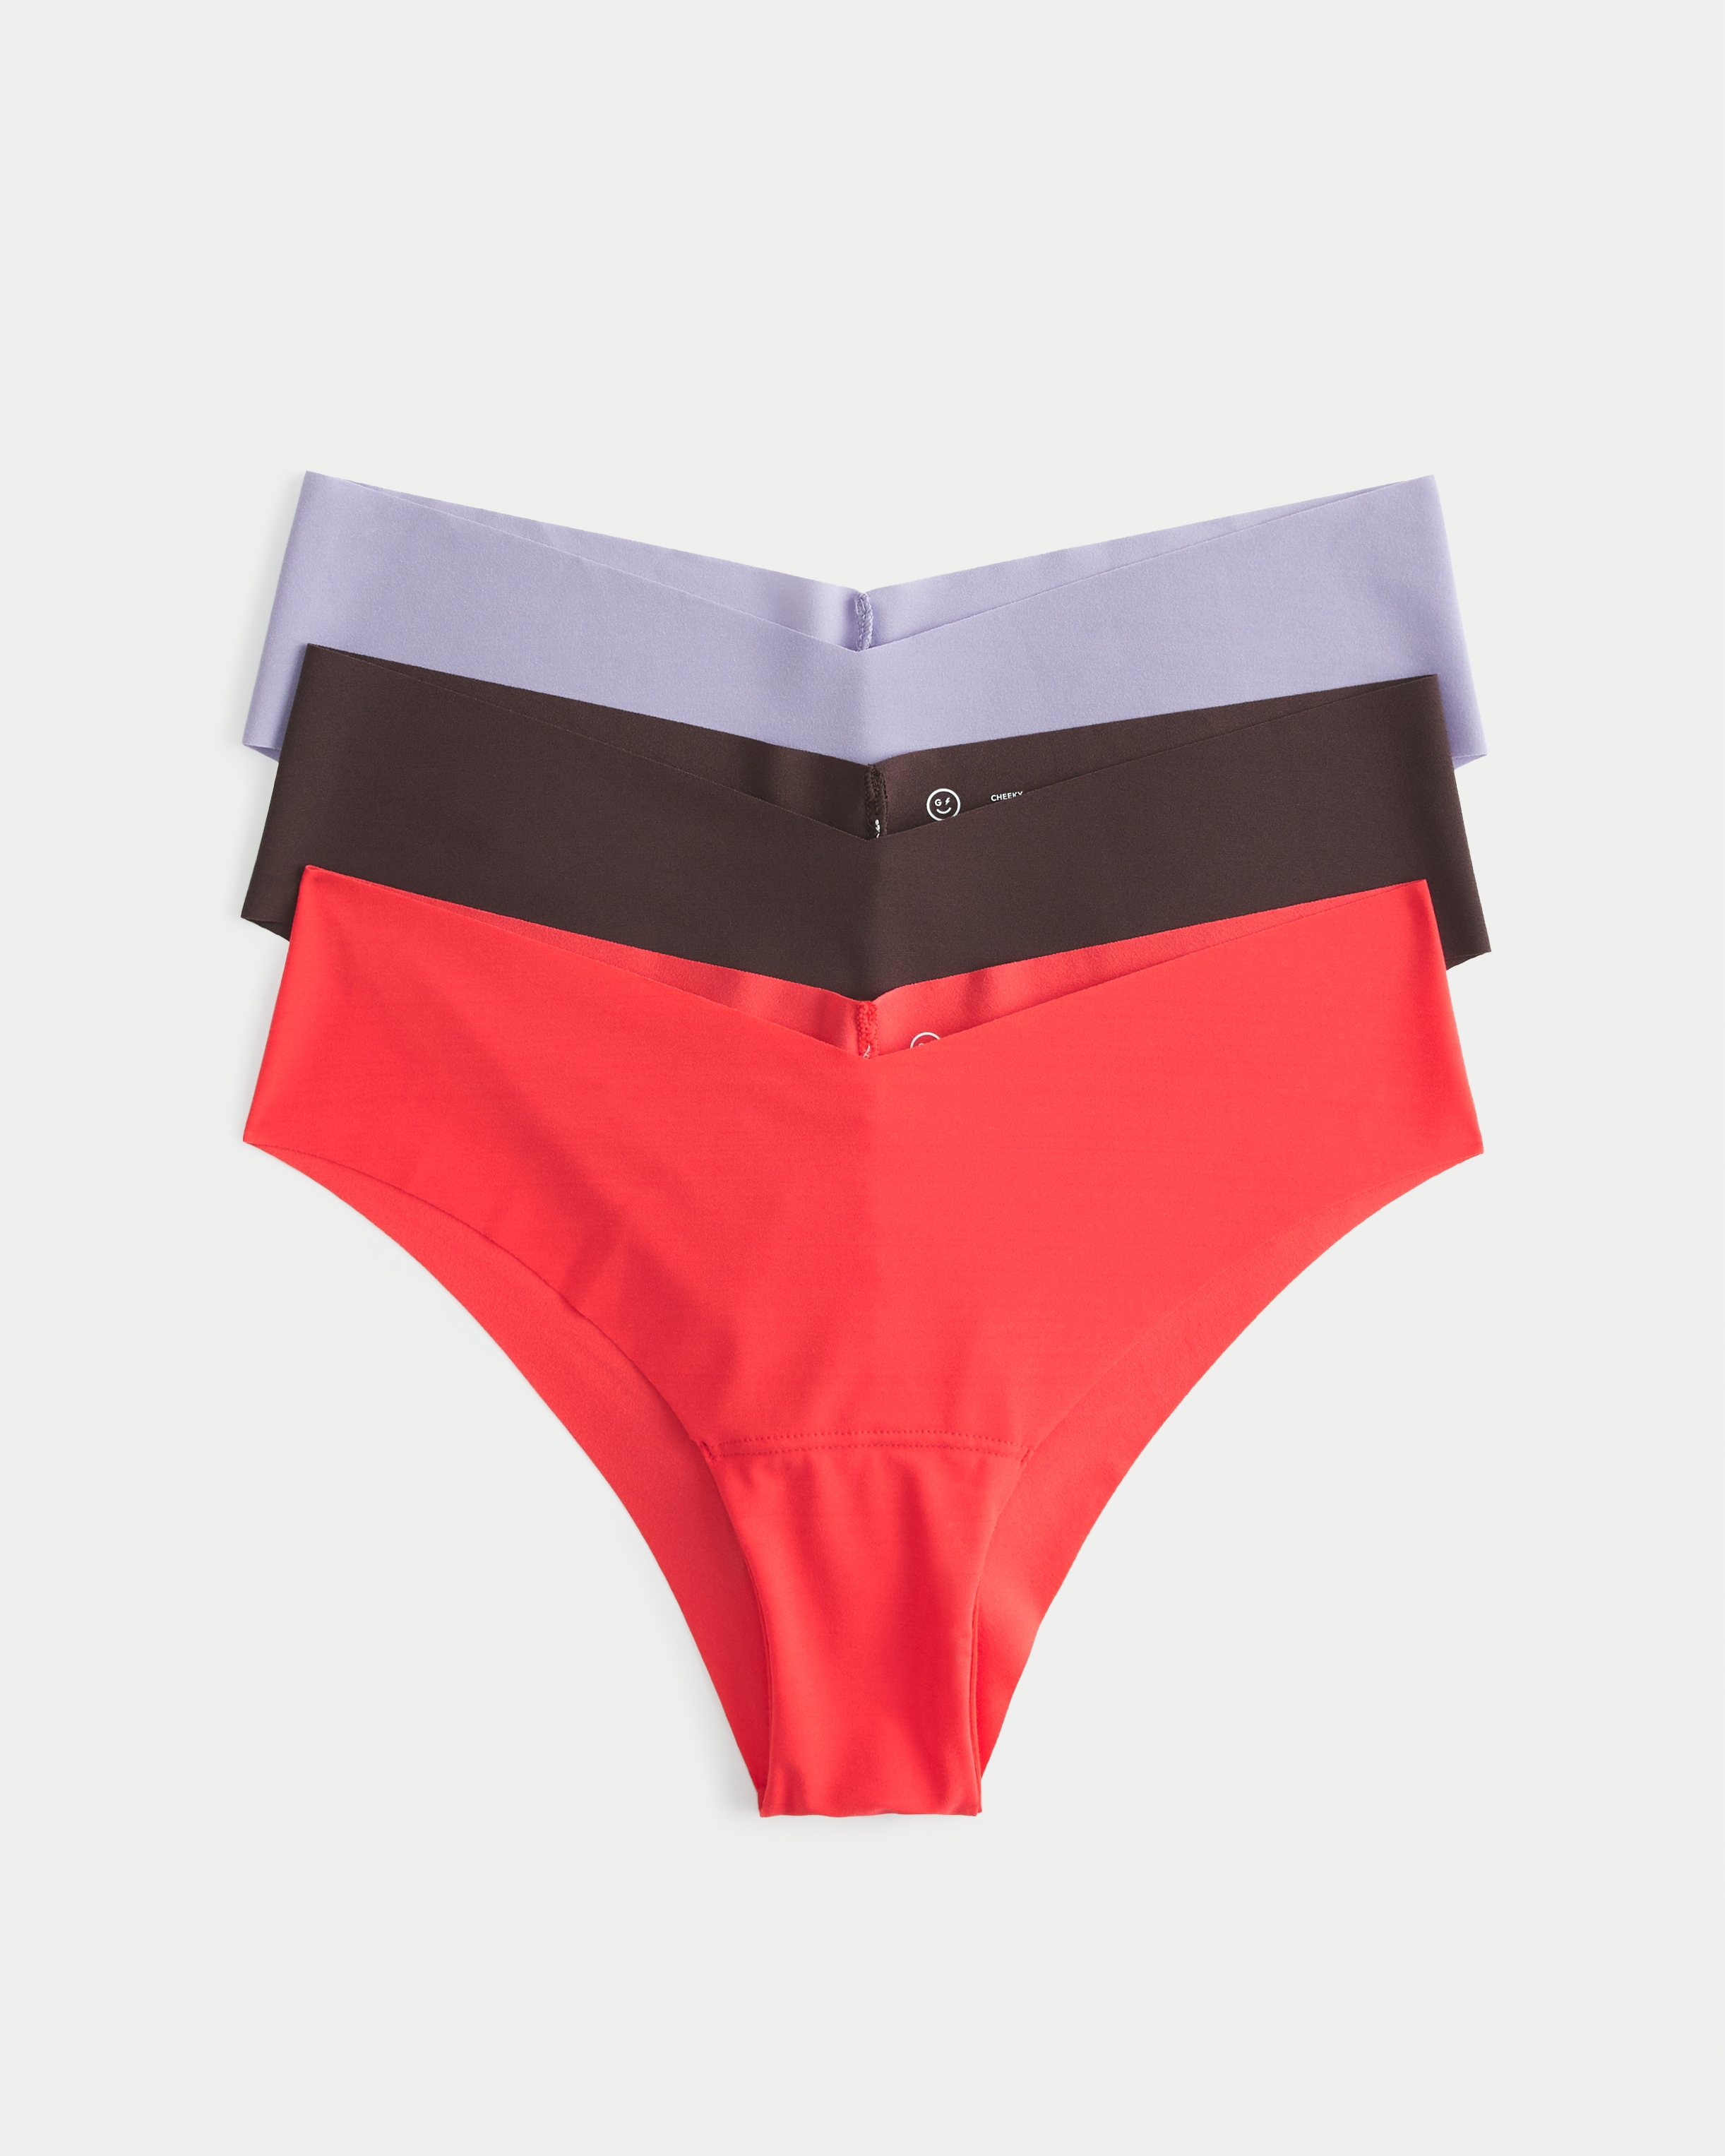 Gilly Hicks No-Show Cheeky Underwear 3-Pack